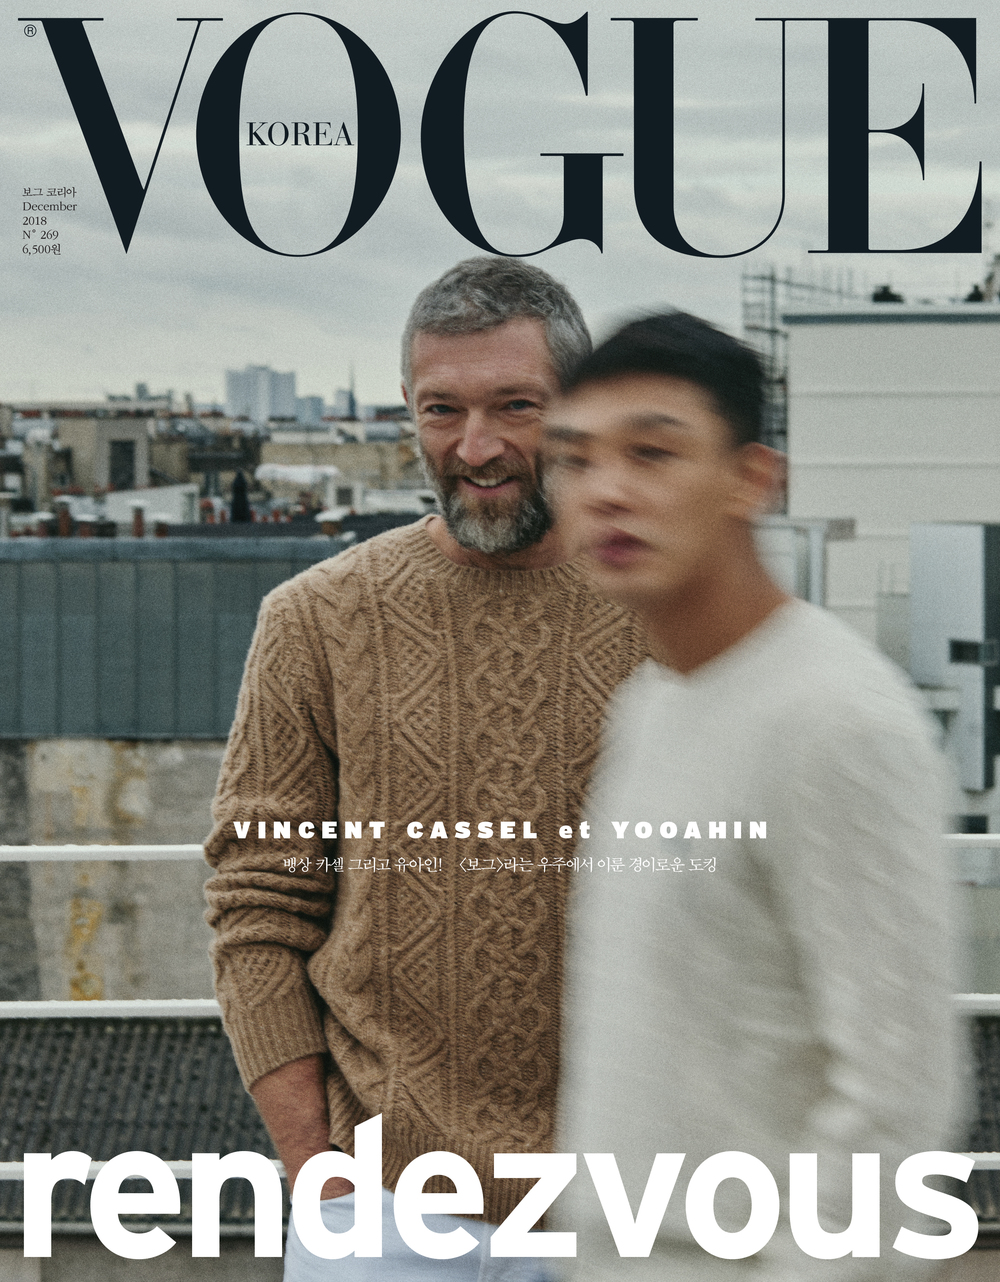 Yoo Ah-in showed off his unrivaled BungerOn November 15, National Bankruptcy Day released the cover of the December issue of fashion magazine Vogue, which contains the unique charm of Yoo Ah-in and Bang Sang Cassel.National Bankruptcy Day is a work that depicts the story of people who made different choices in the IMF Danger in 1997, from the remaining week to the national bankruptcy, to those who want to stop Danger, to those who bet on Danger, and ordinary people who want to protect their company and family.The Vogue cover, which was released this time, captures the hearts of those who see it as an irreplaceable charisma and intense combination of Yoo Ah-in, who is divided from National Bankruptcy Day to Yoon Jung-hak, and Bang Sang Cassel, who turned into IMF President.The two Actors, who focus attention on chic costumes and natural styling, impress with a masculine charisma as well as a soft charm.Yoo Ah-in, who tried to transform himself into a new Acting through the role of Yoon Jung-hak, betting on Danger in National Bankruptcy Day, focuses his attention on this cover with his perfect dandy style and his deep eyes and the charm of a character with complex and three-dimensional emotions.In addition, Vincent Cassel, who has shown intense acting that adds tension to the movie as an intelligent and cool IMF president, makes it impossible to keep eyes on viewers by radiating charisma that intenseness and softness coexist with fashionable knit style and distinctive sharp eyes and relaxed powder.bak-beauty